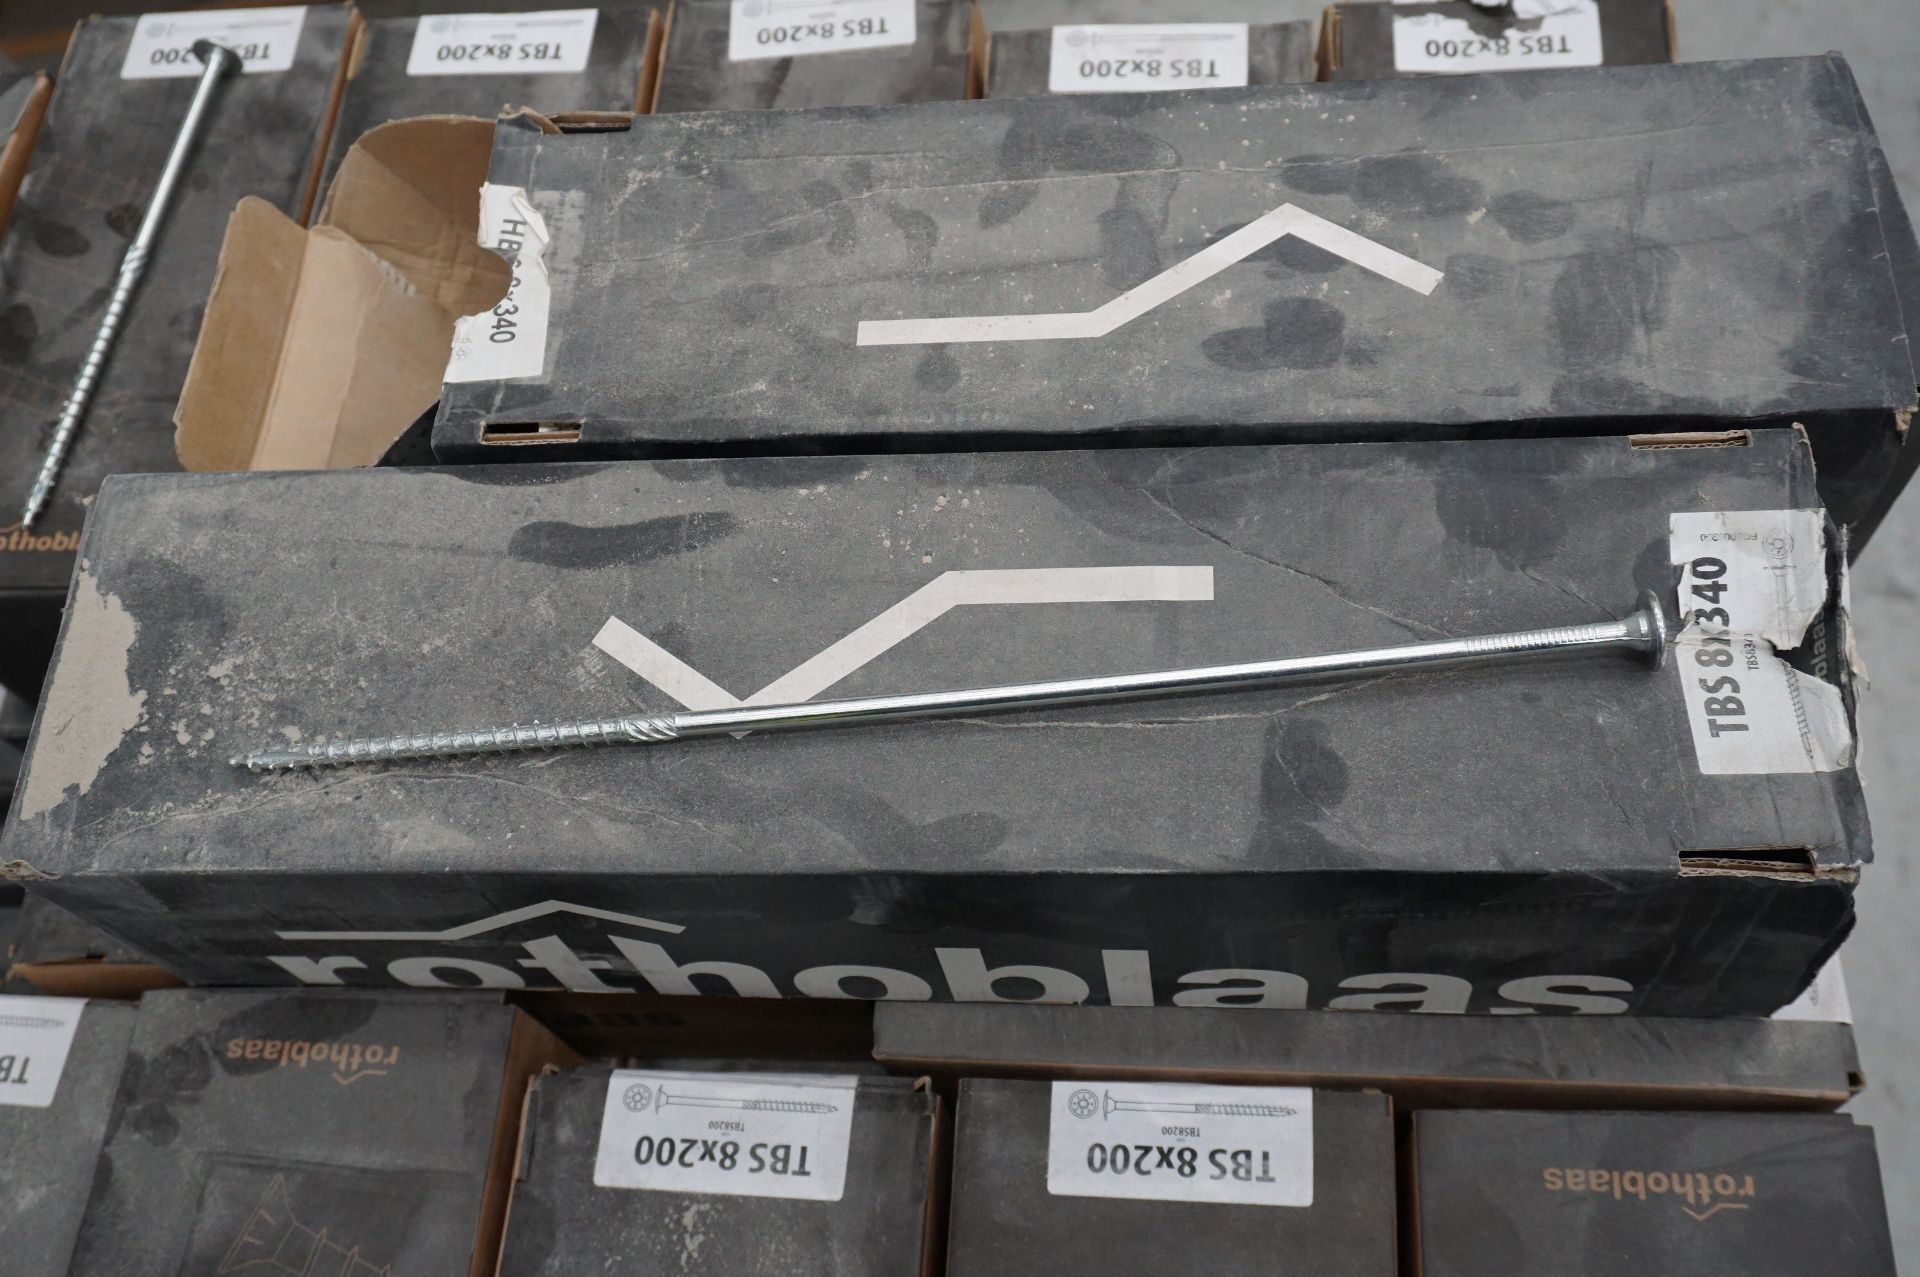 1x (no.) pallet box of mixed Rothoblaas screws to include TBS 8 x 200mm self tapping wood screws, - Image 7 of 8